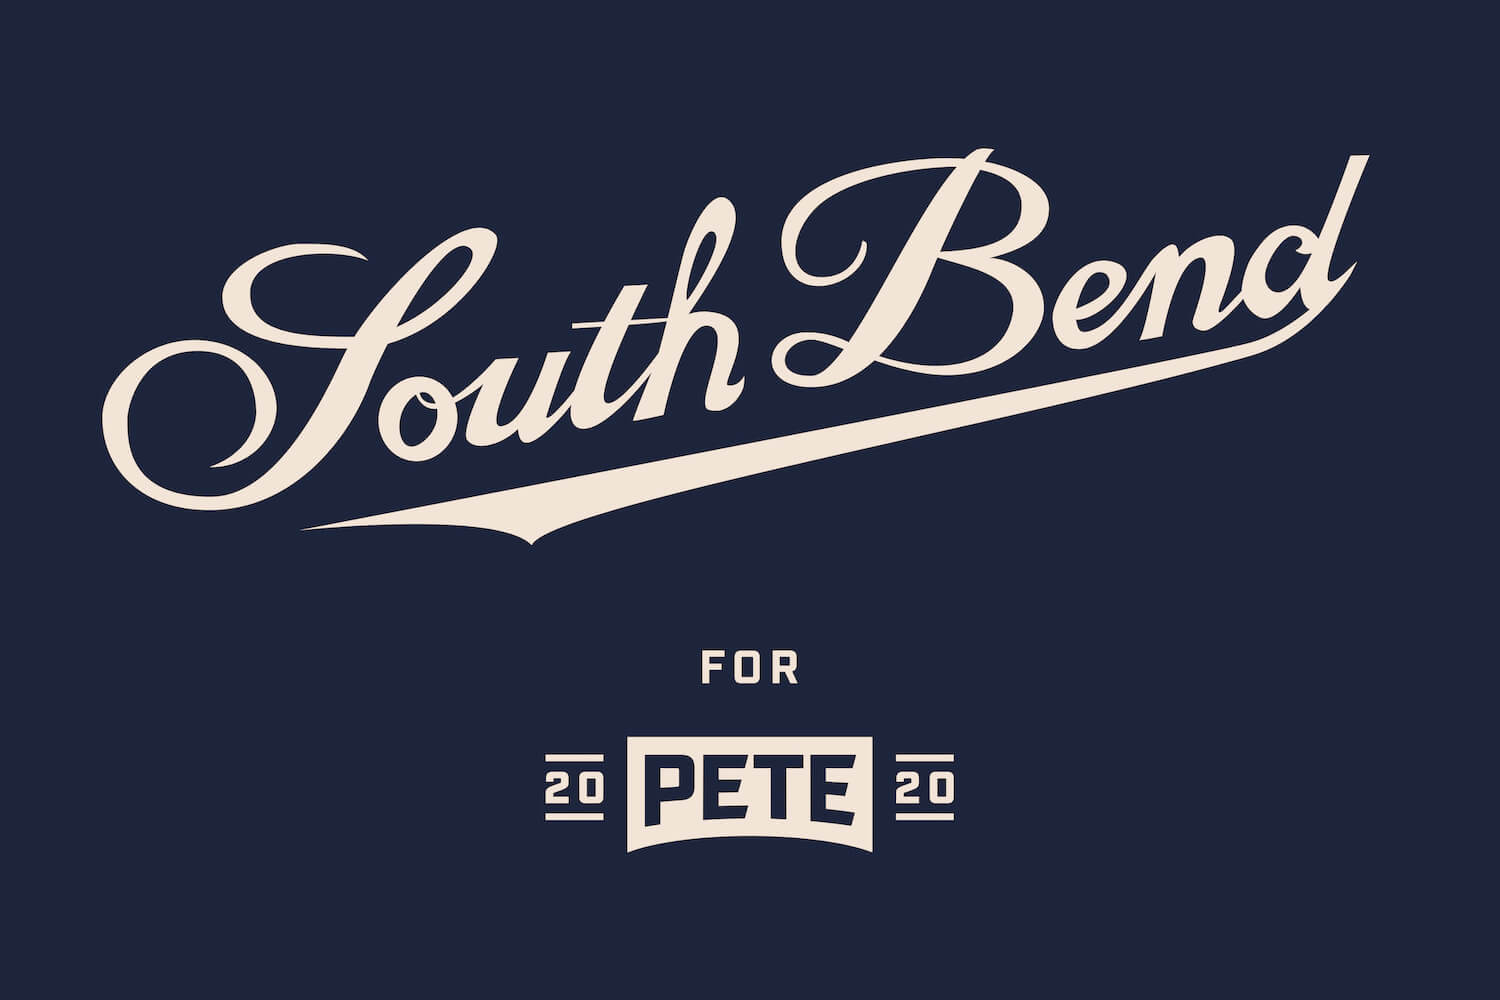 South Bend for Pete 2020